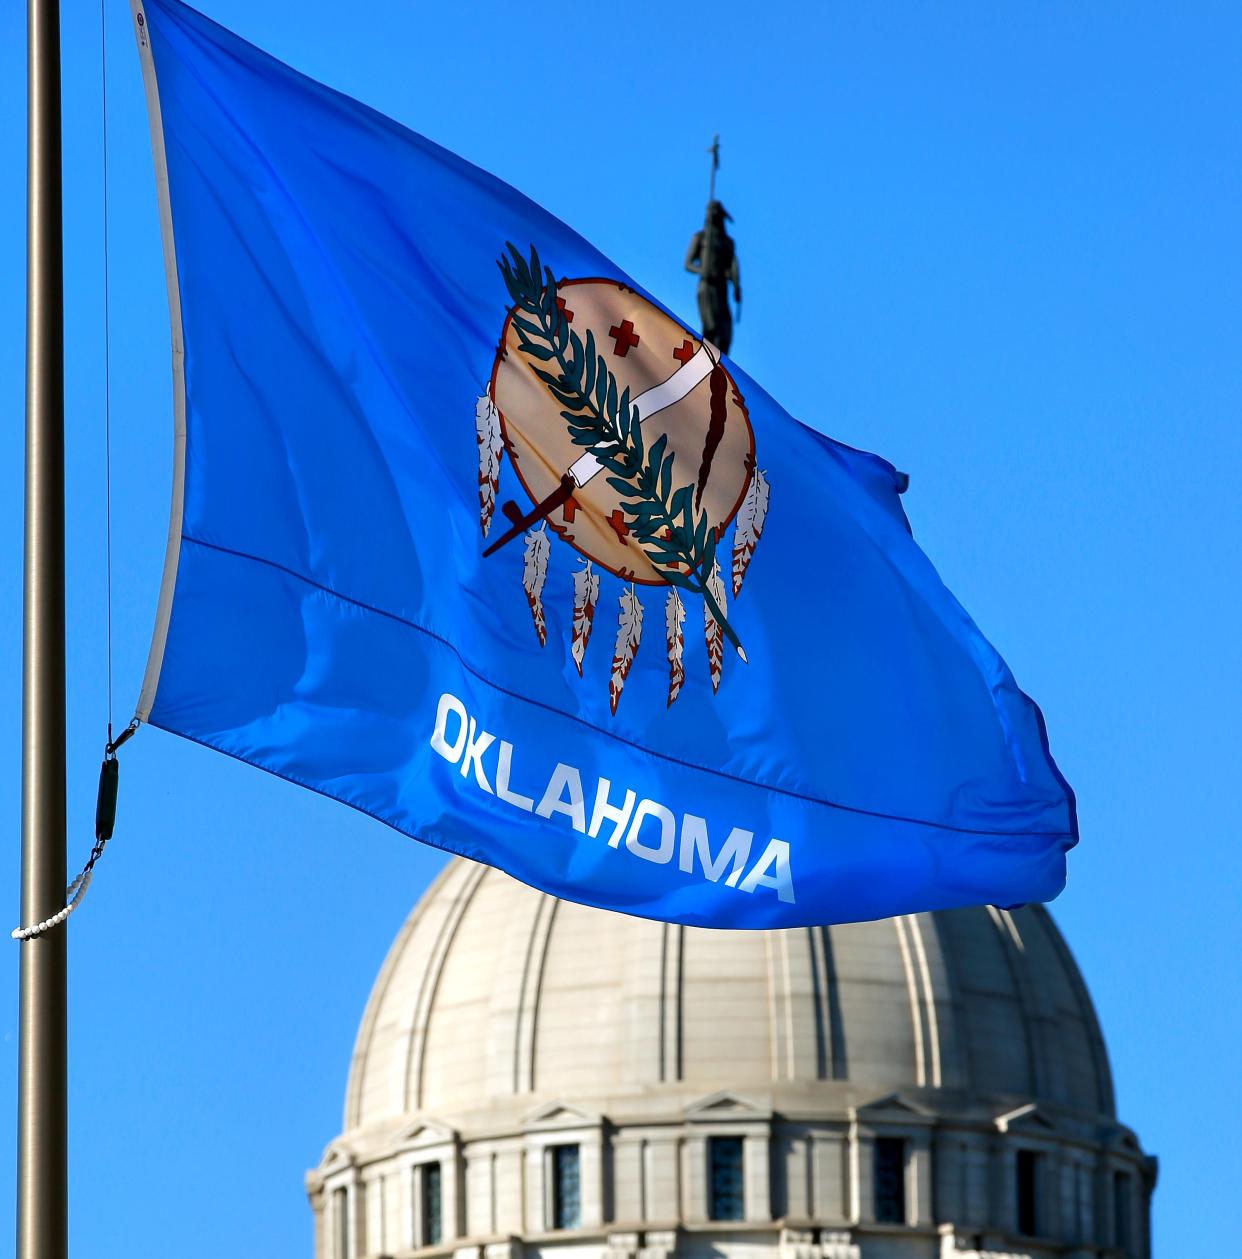 According to the Oklahoma Historical Society, the Oklahoma flag features an Osage warrior’s shield on a blue background. An olive branch and a calumet, or peace pipe, lay across the shield. Seven eagle feathers decorate the shield. Behind it, "The Guardian" can be seen atop the Capitol dome. The statue was designed by the late state Sen. Enoch Kelly Haney. The Historical Society describes it as a combination of spiritual, material and cultural characteristics of the 39 tribes in Oklahoma. Oklahoma is the first state to have a Capitol building featuring an Native American sculpture on its dome.